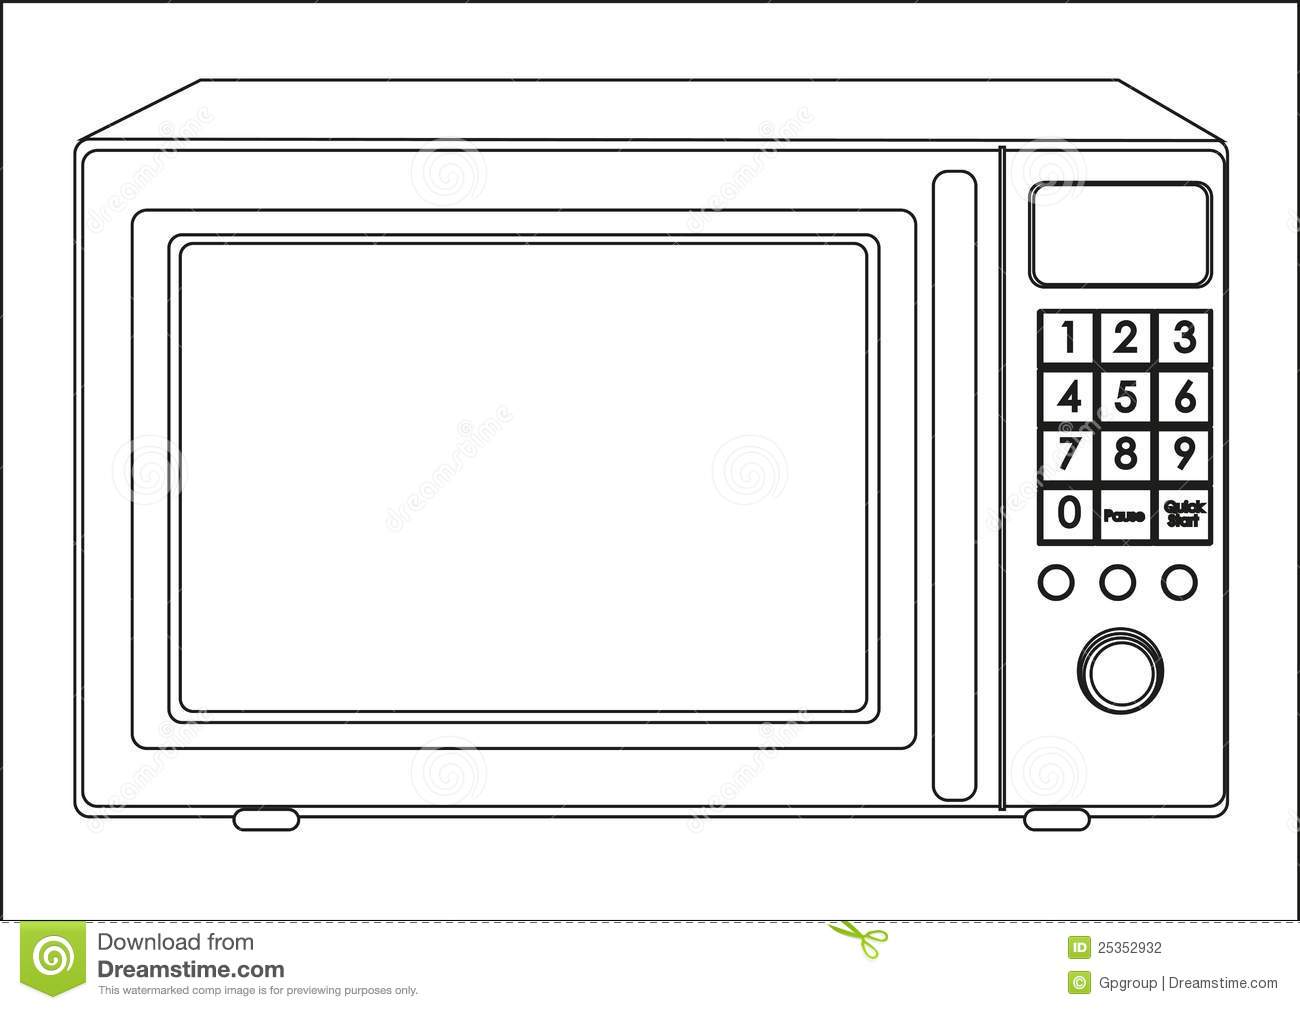 Microwave Clip Art Illustration Of A Microwave